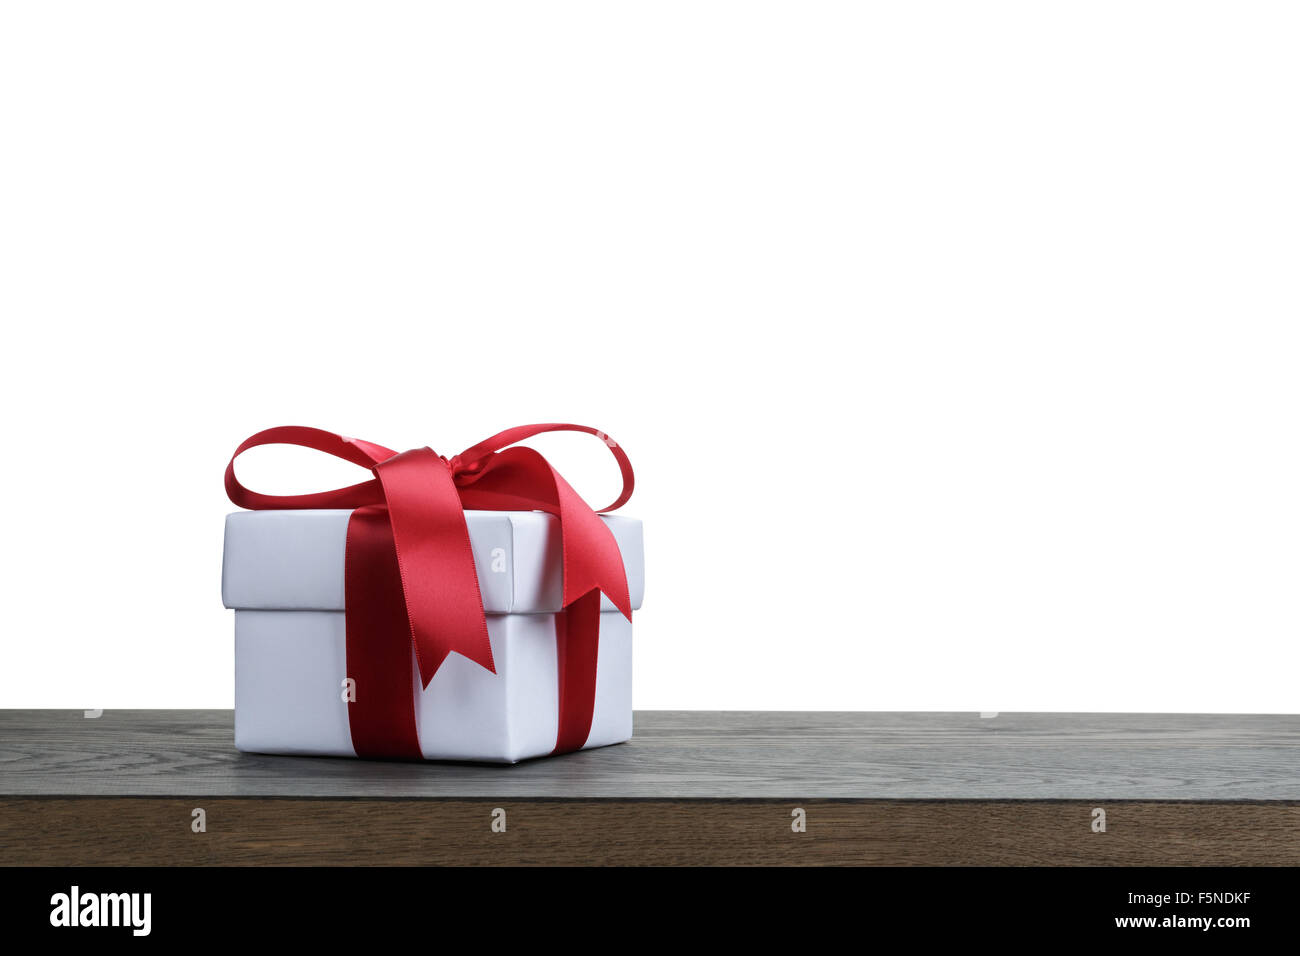 gift box with red bow on rustic table for border Stock Photo